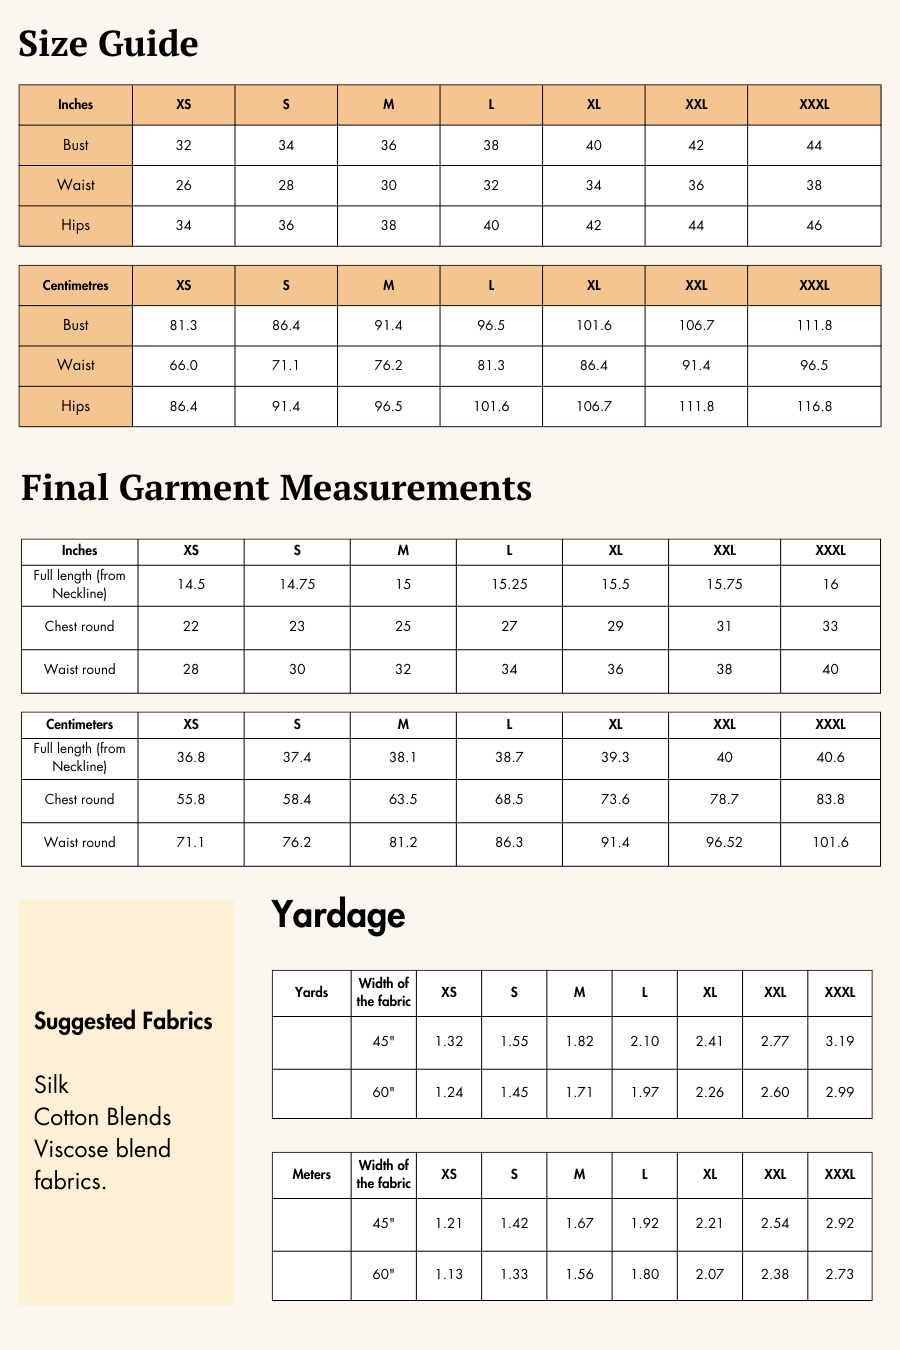 Picture with garment measurements